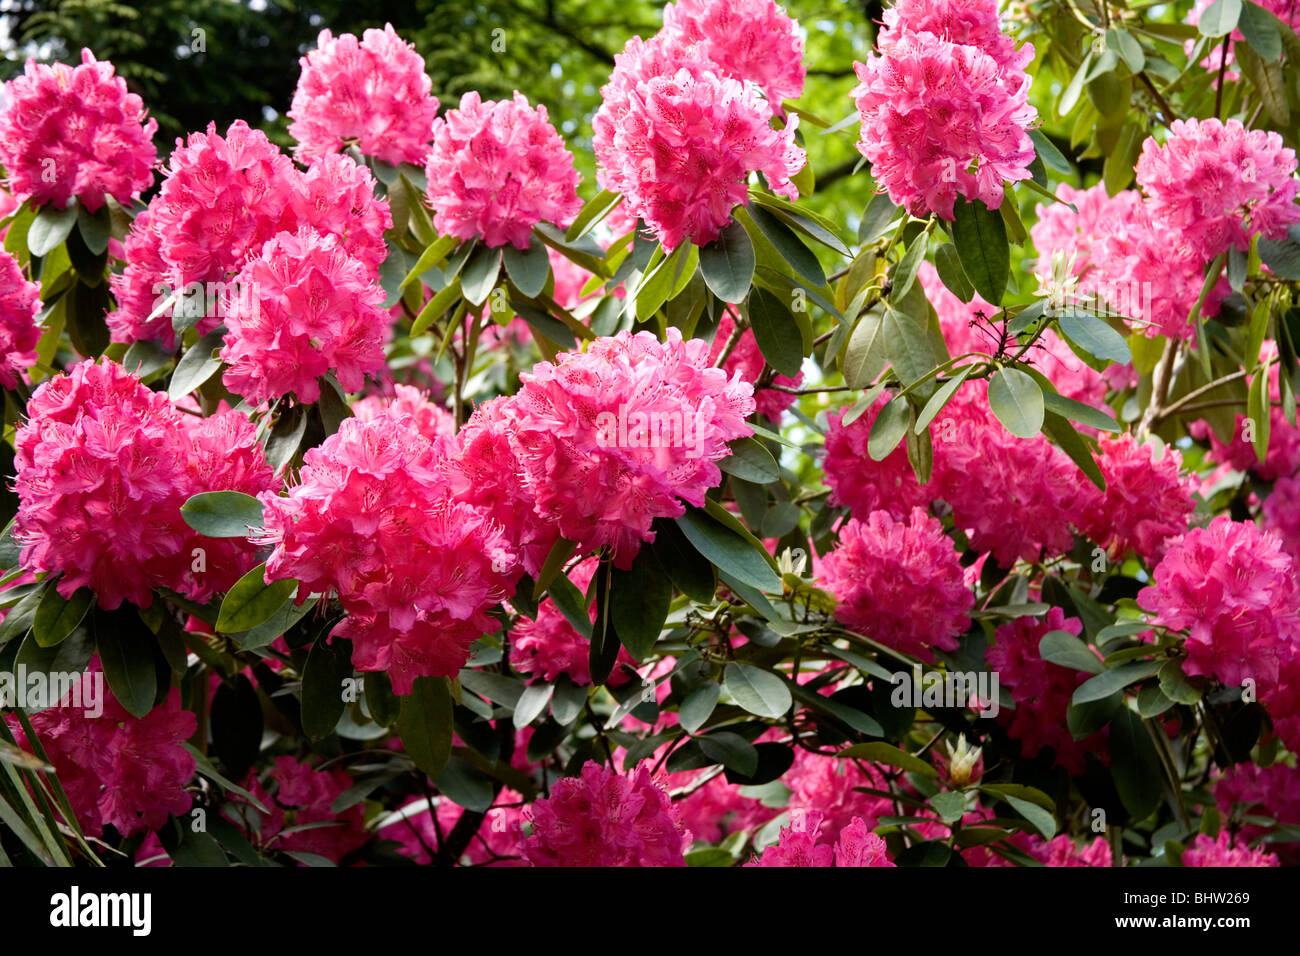 Pink rhododendron bush Stock Photo